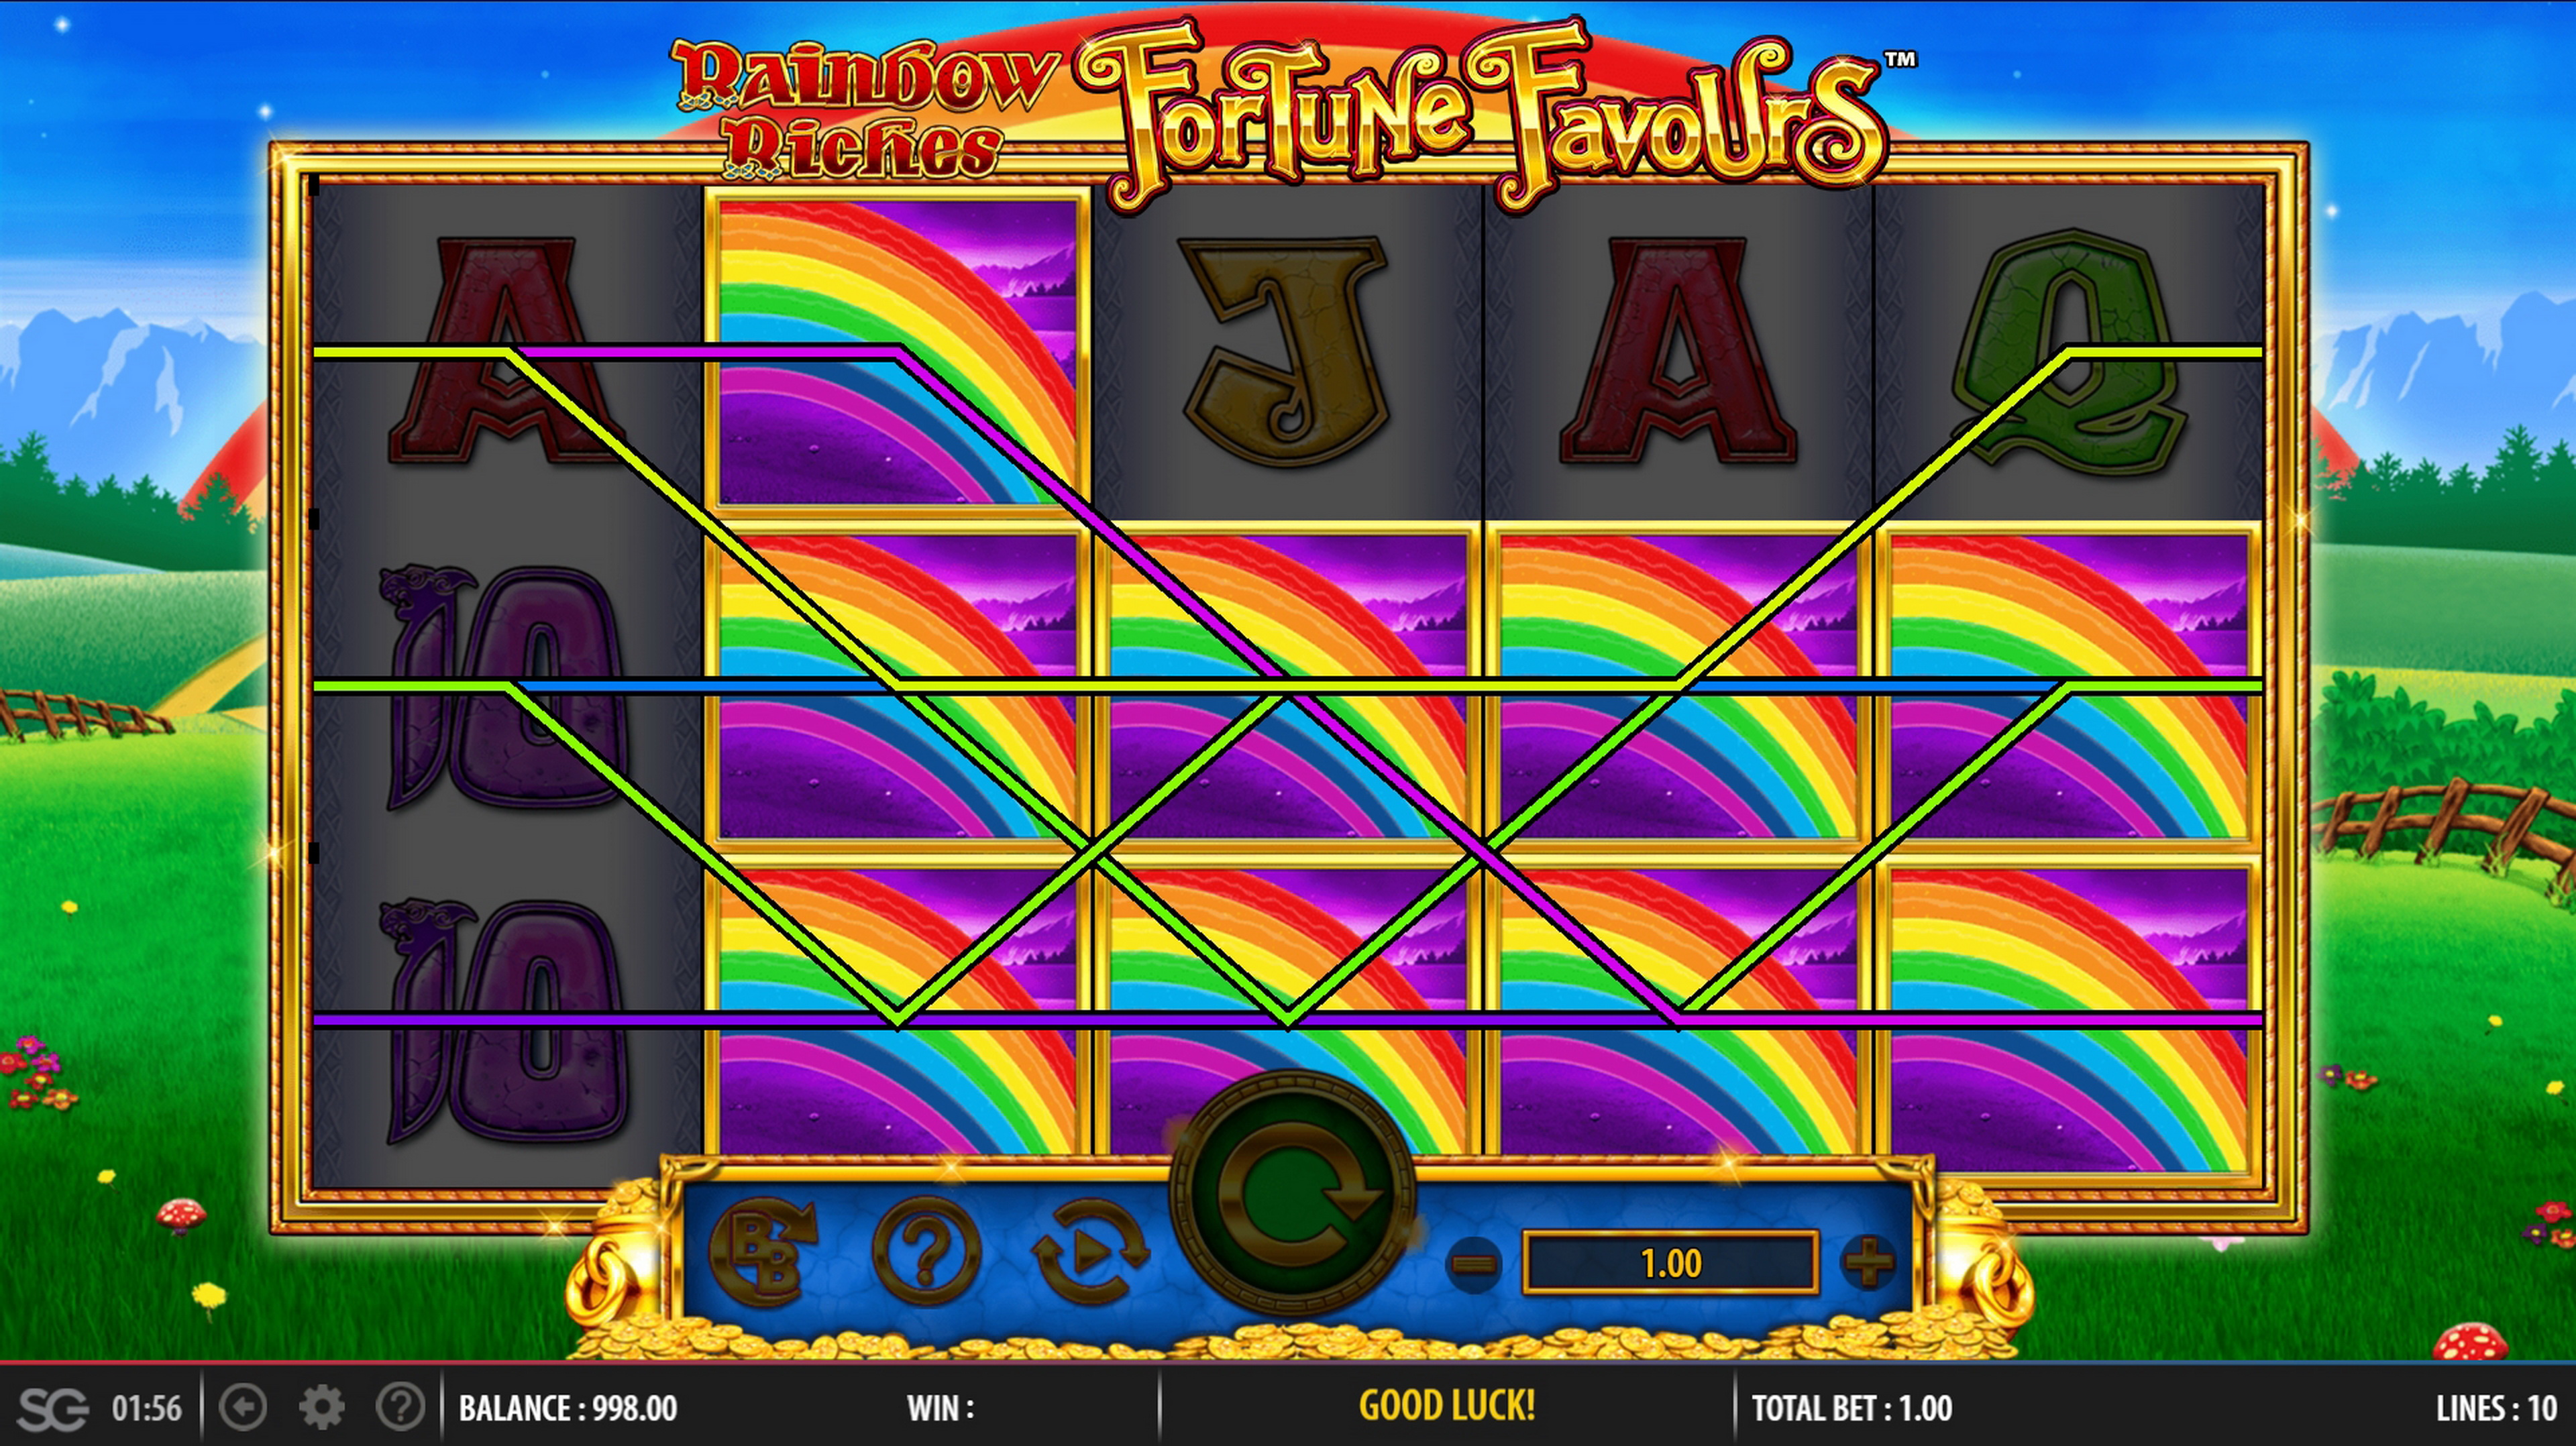 Win Money in Rainbow Riches Fortune Favours Free Slot Game by Barcrest Games